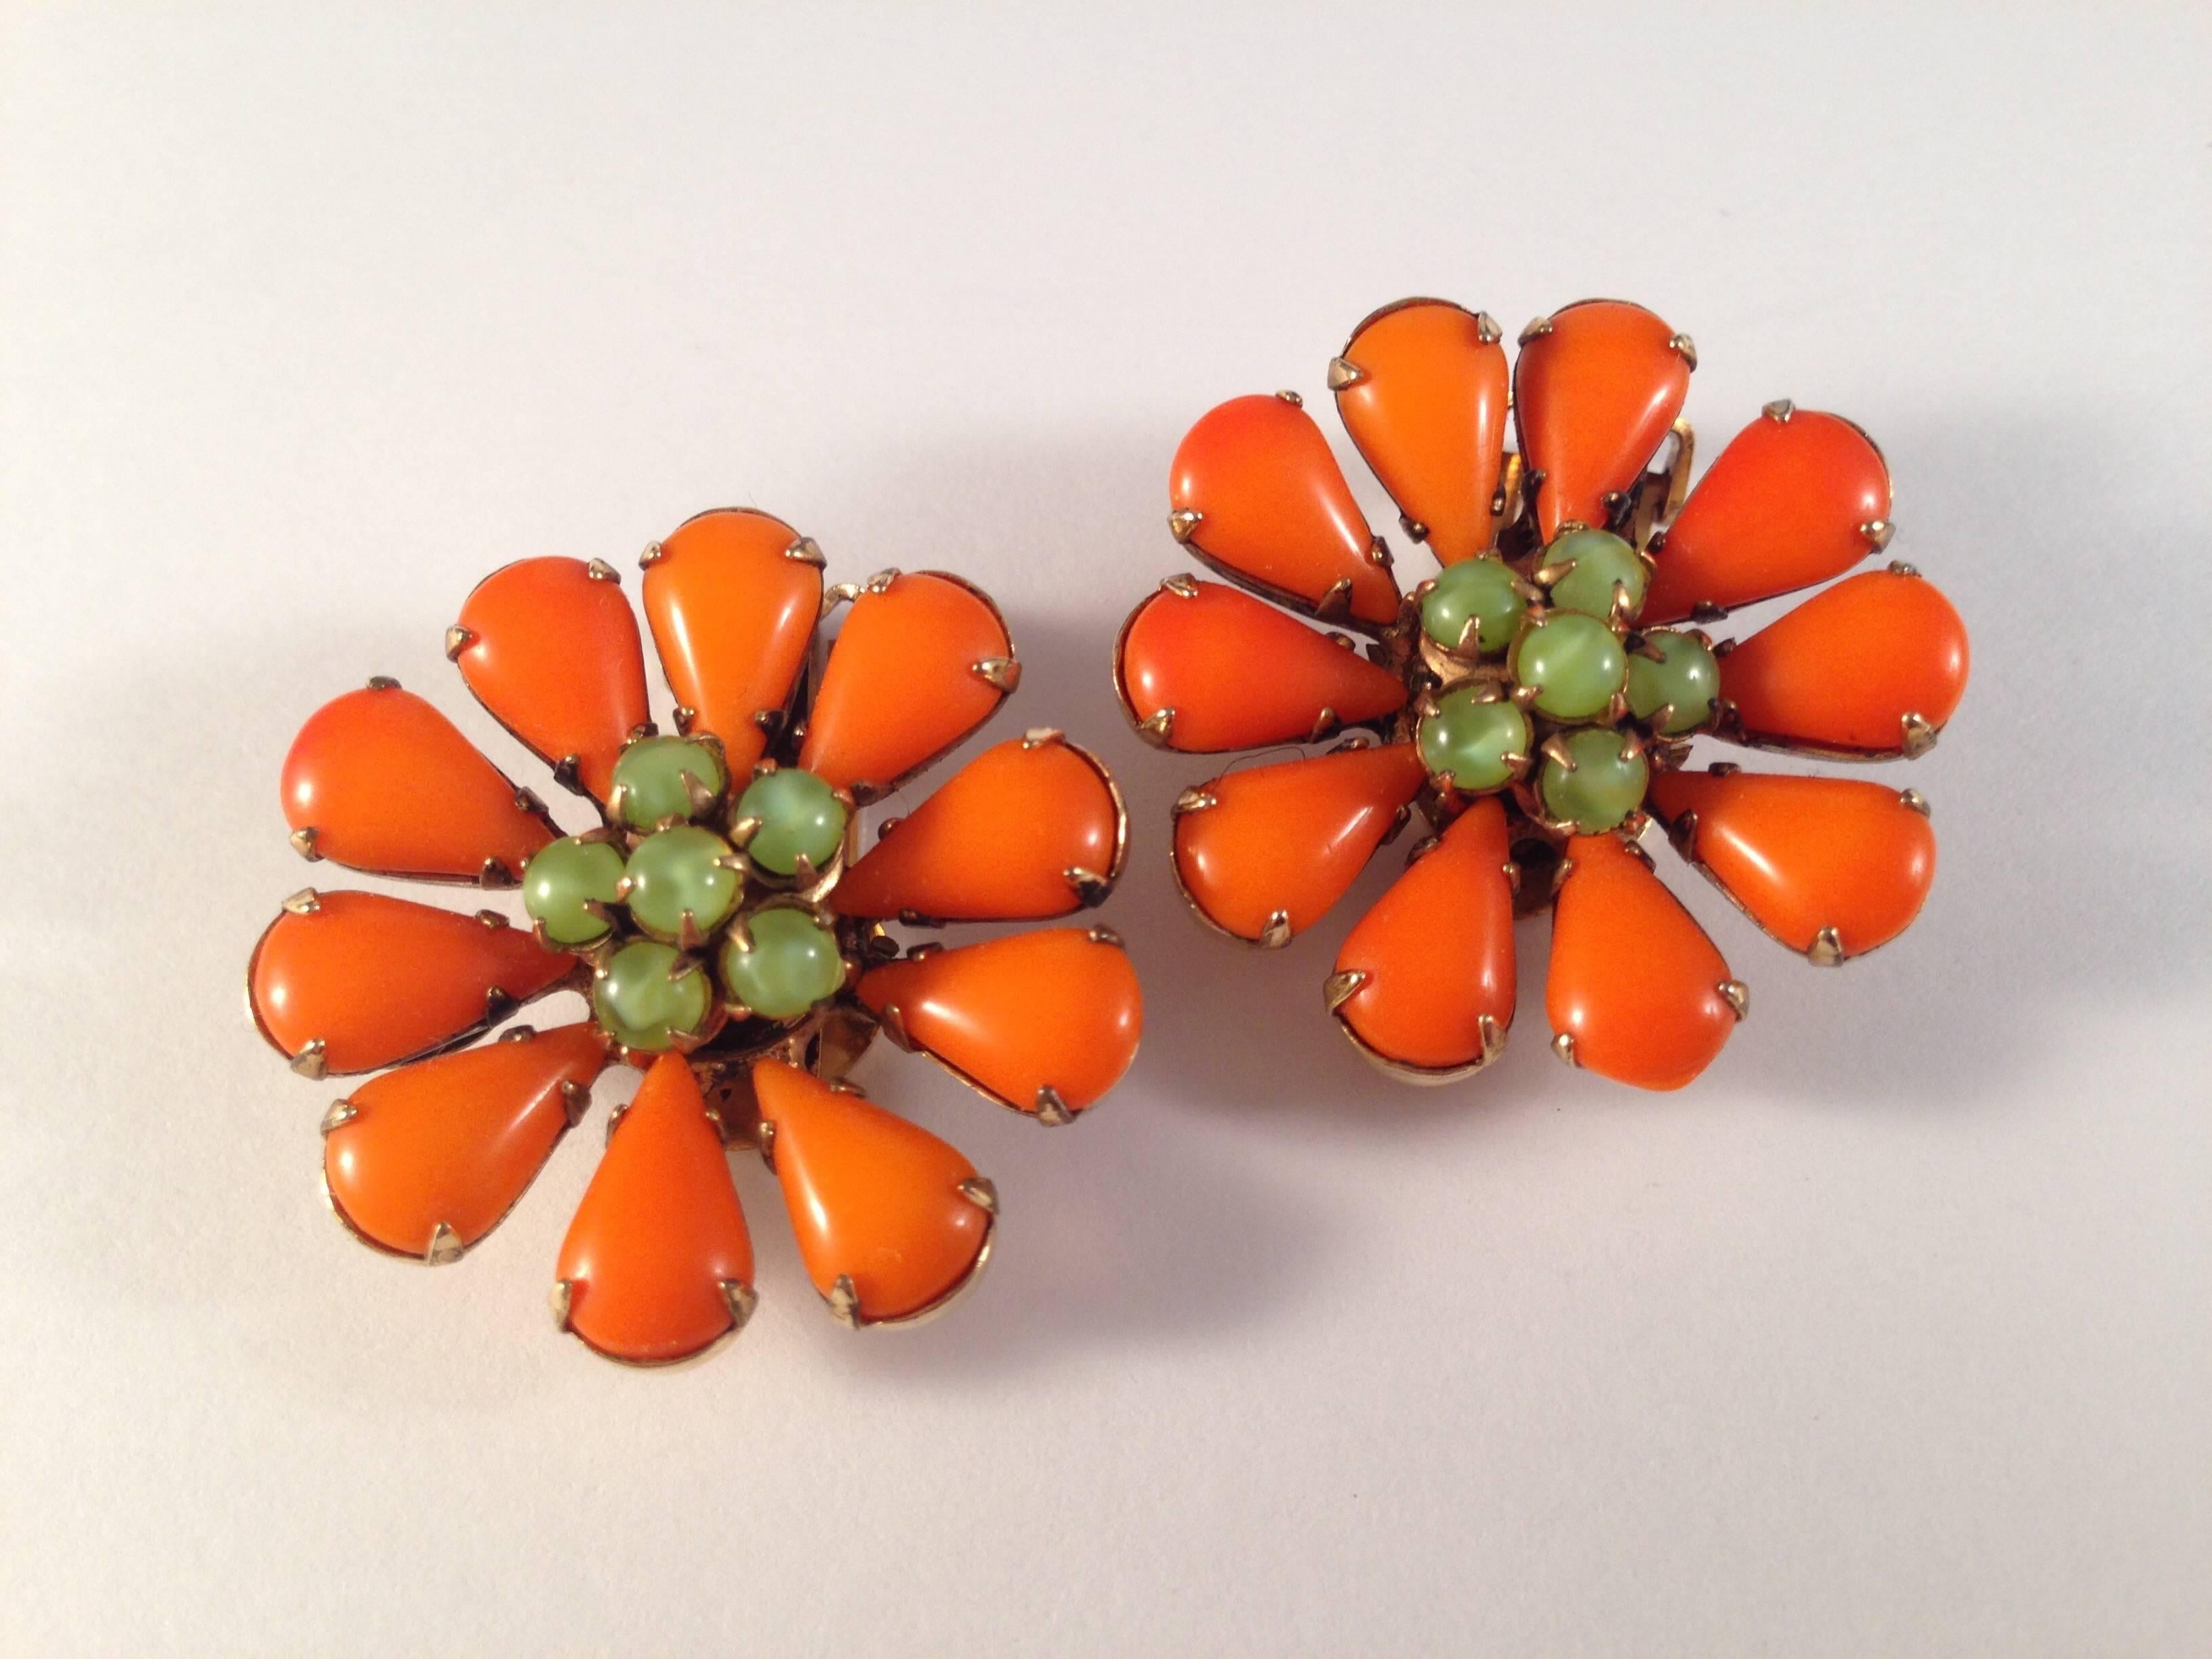 1960s flower clip-on earrings by Schreiner New York. Orange glass petals and green glass bead centers. These earrings are so fun and definitely make a statement. They measure 1 1/8